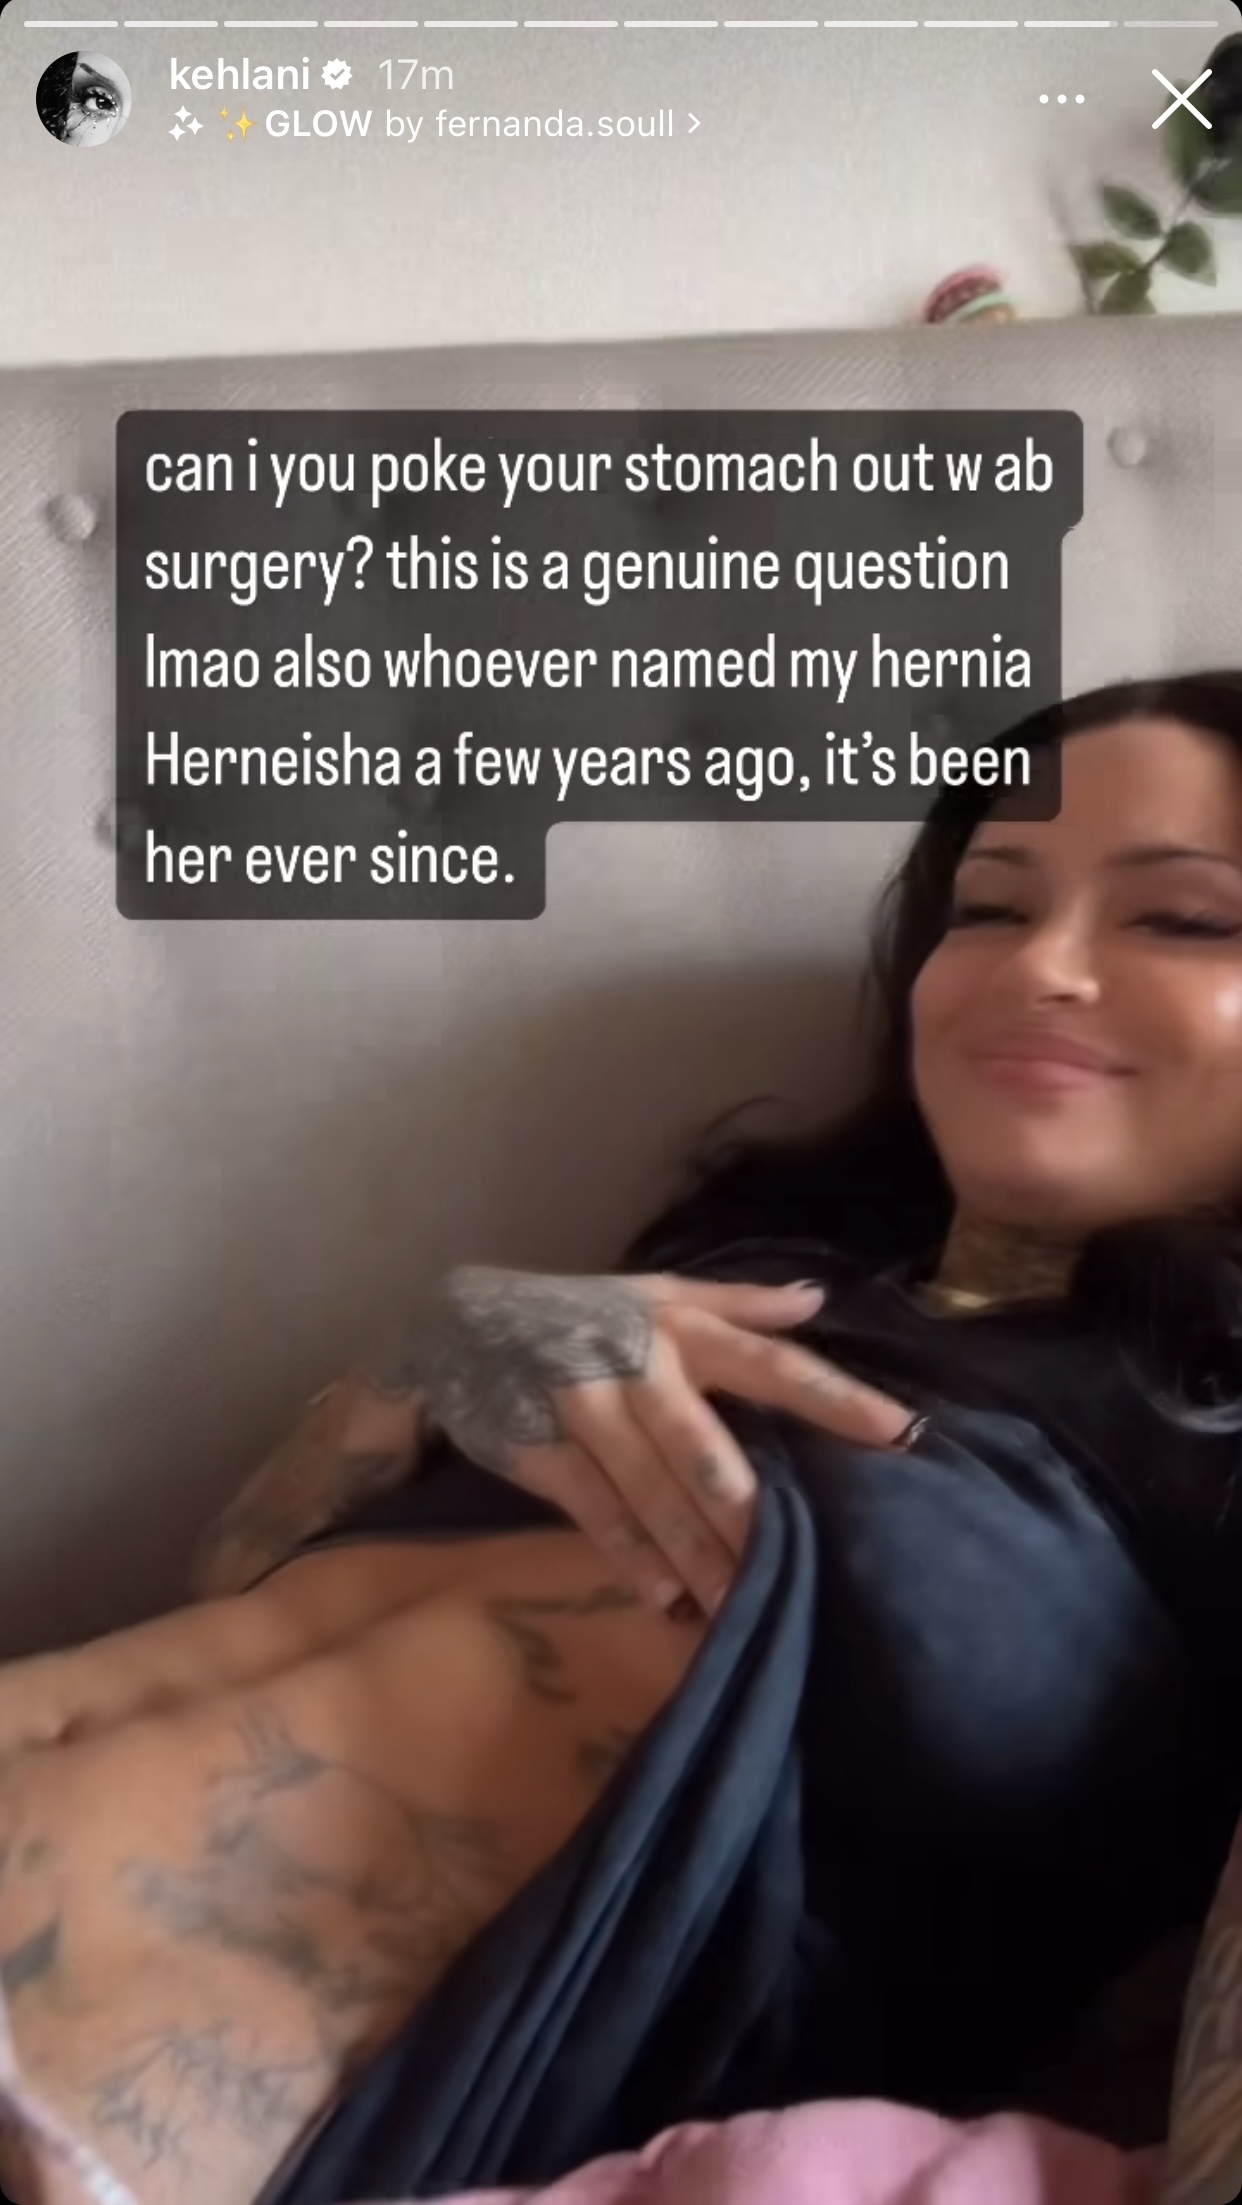 Smiling Kehlani lounging, with tattooed arm resting on torso and caption: &quot;can i poke your stomach out w ab surgery? this is a genuine question lmao also whoever named my hernia Herneisha a few years ago, it&#x27;s been her ever since&quot;